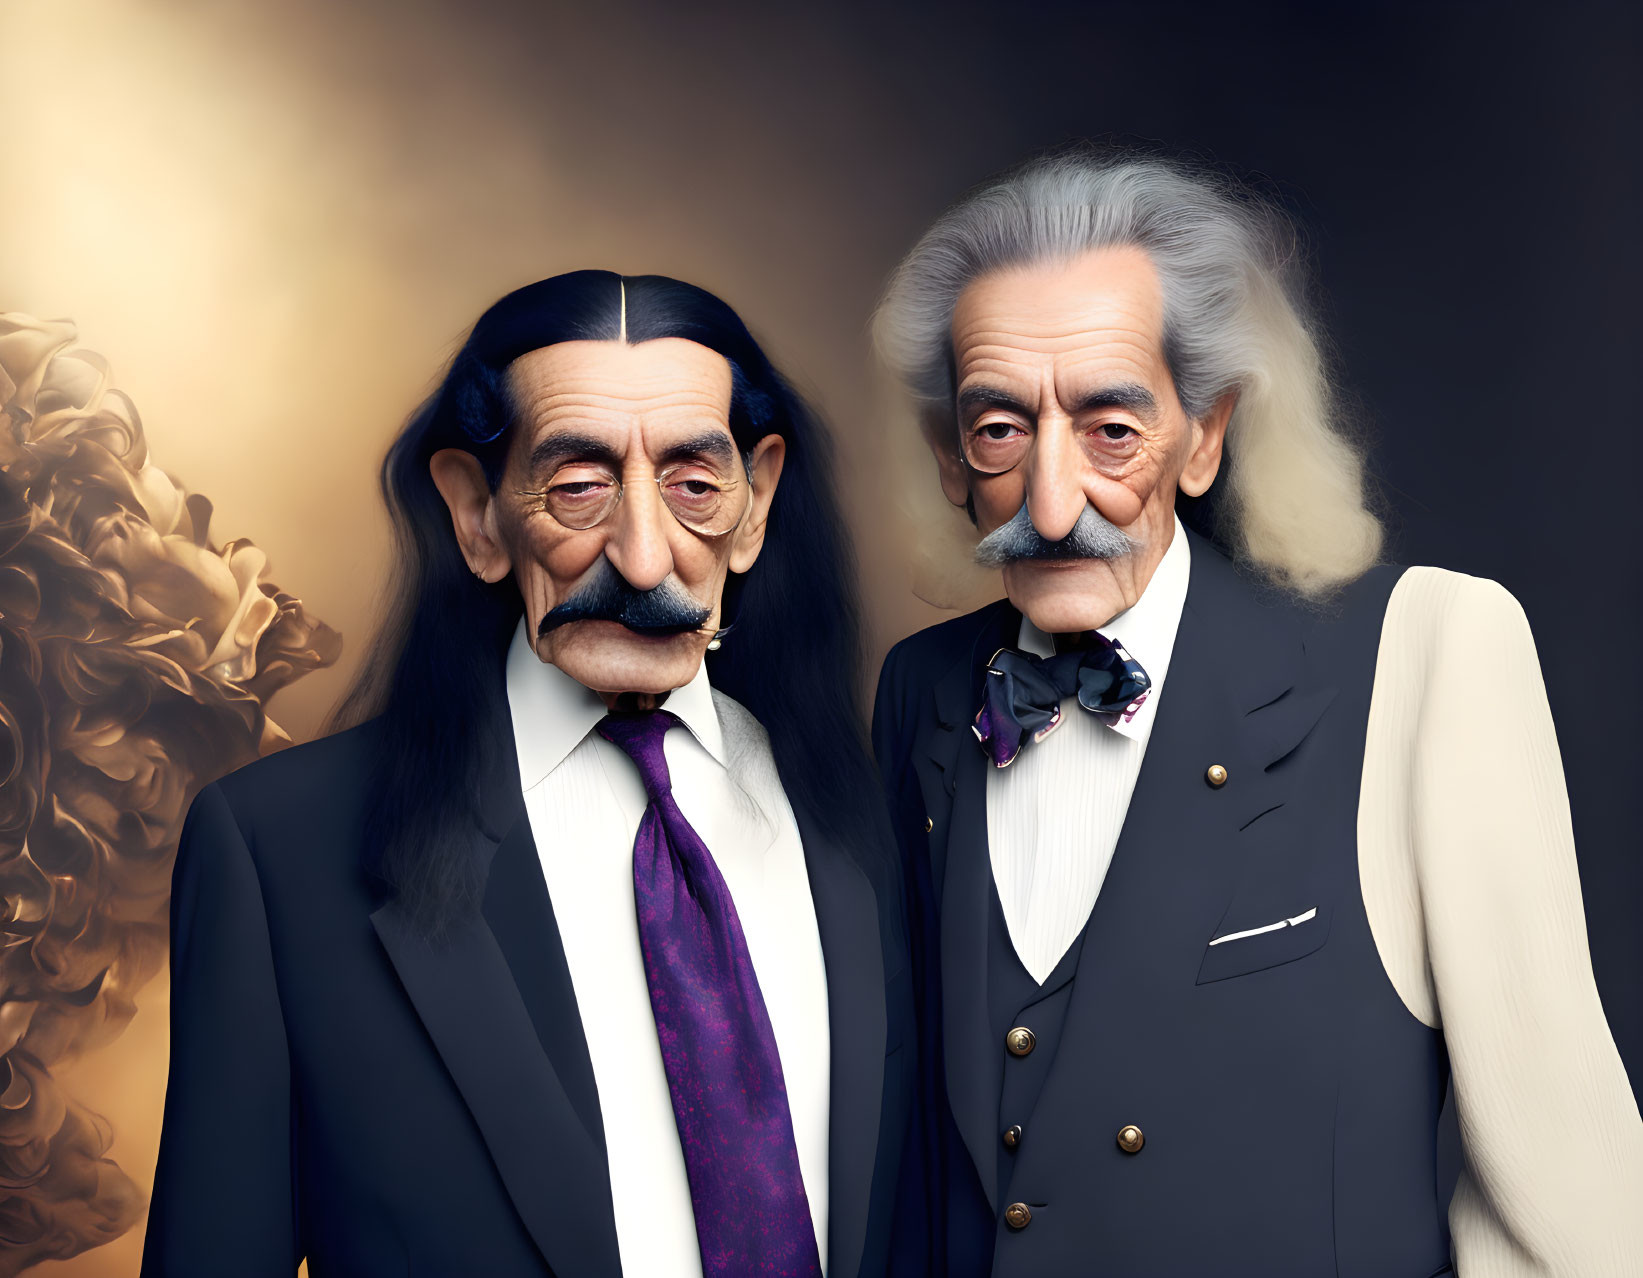 The Dali Brothers 1